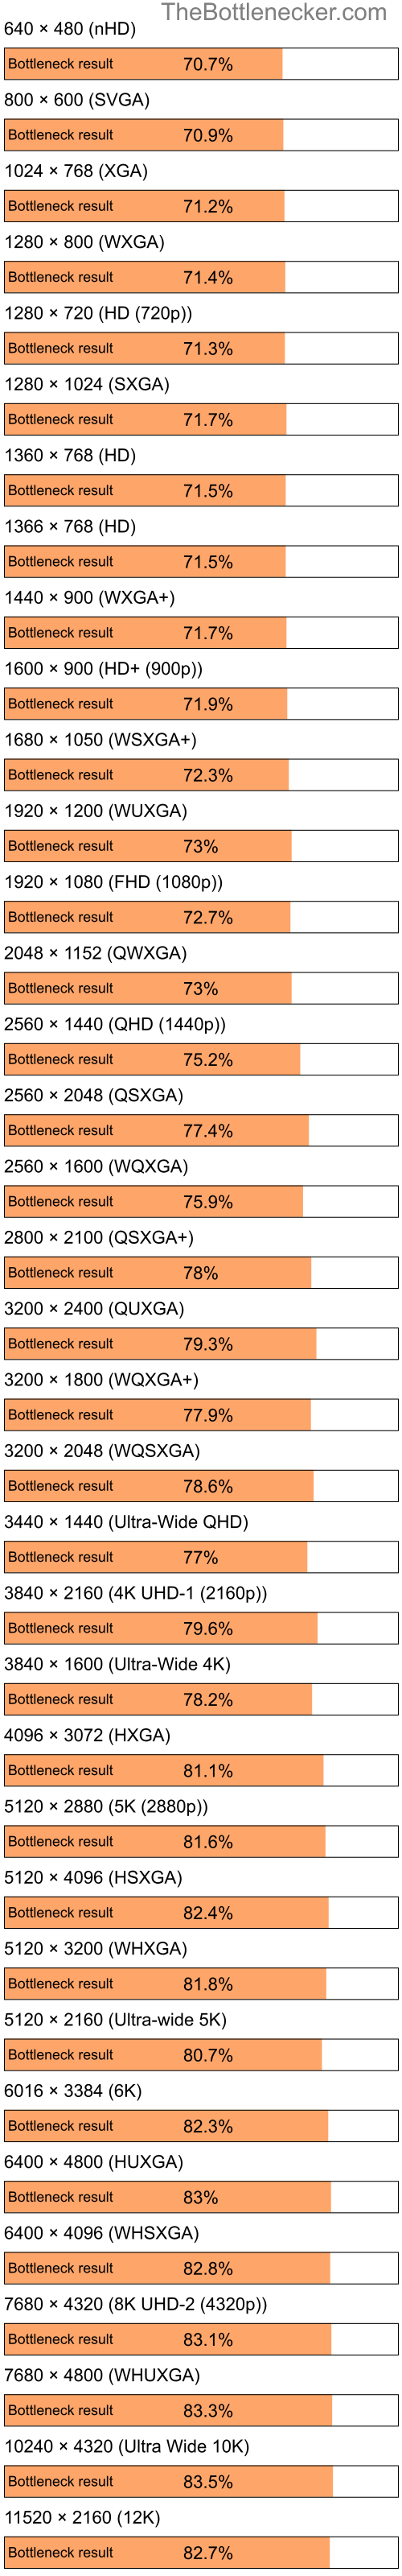 Bottleneck results by resolution for Intel Pentium 4 and NVIDIA GeForce 6500 in Processor Intense Tasks